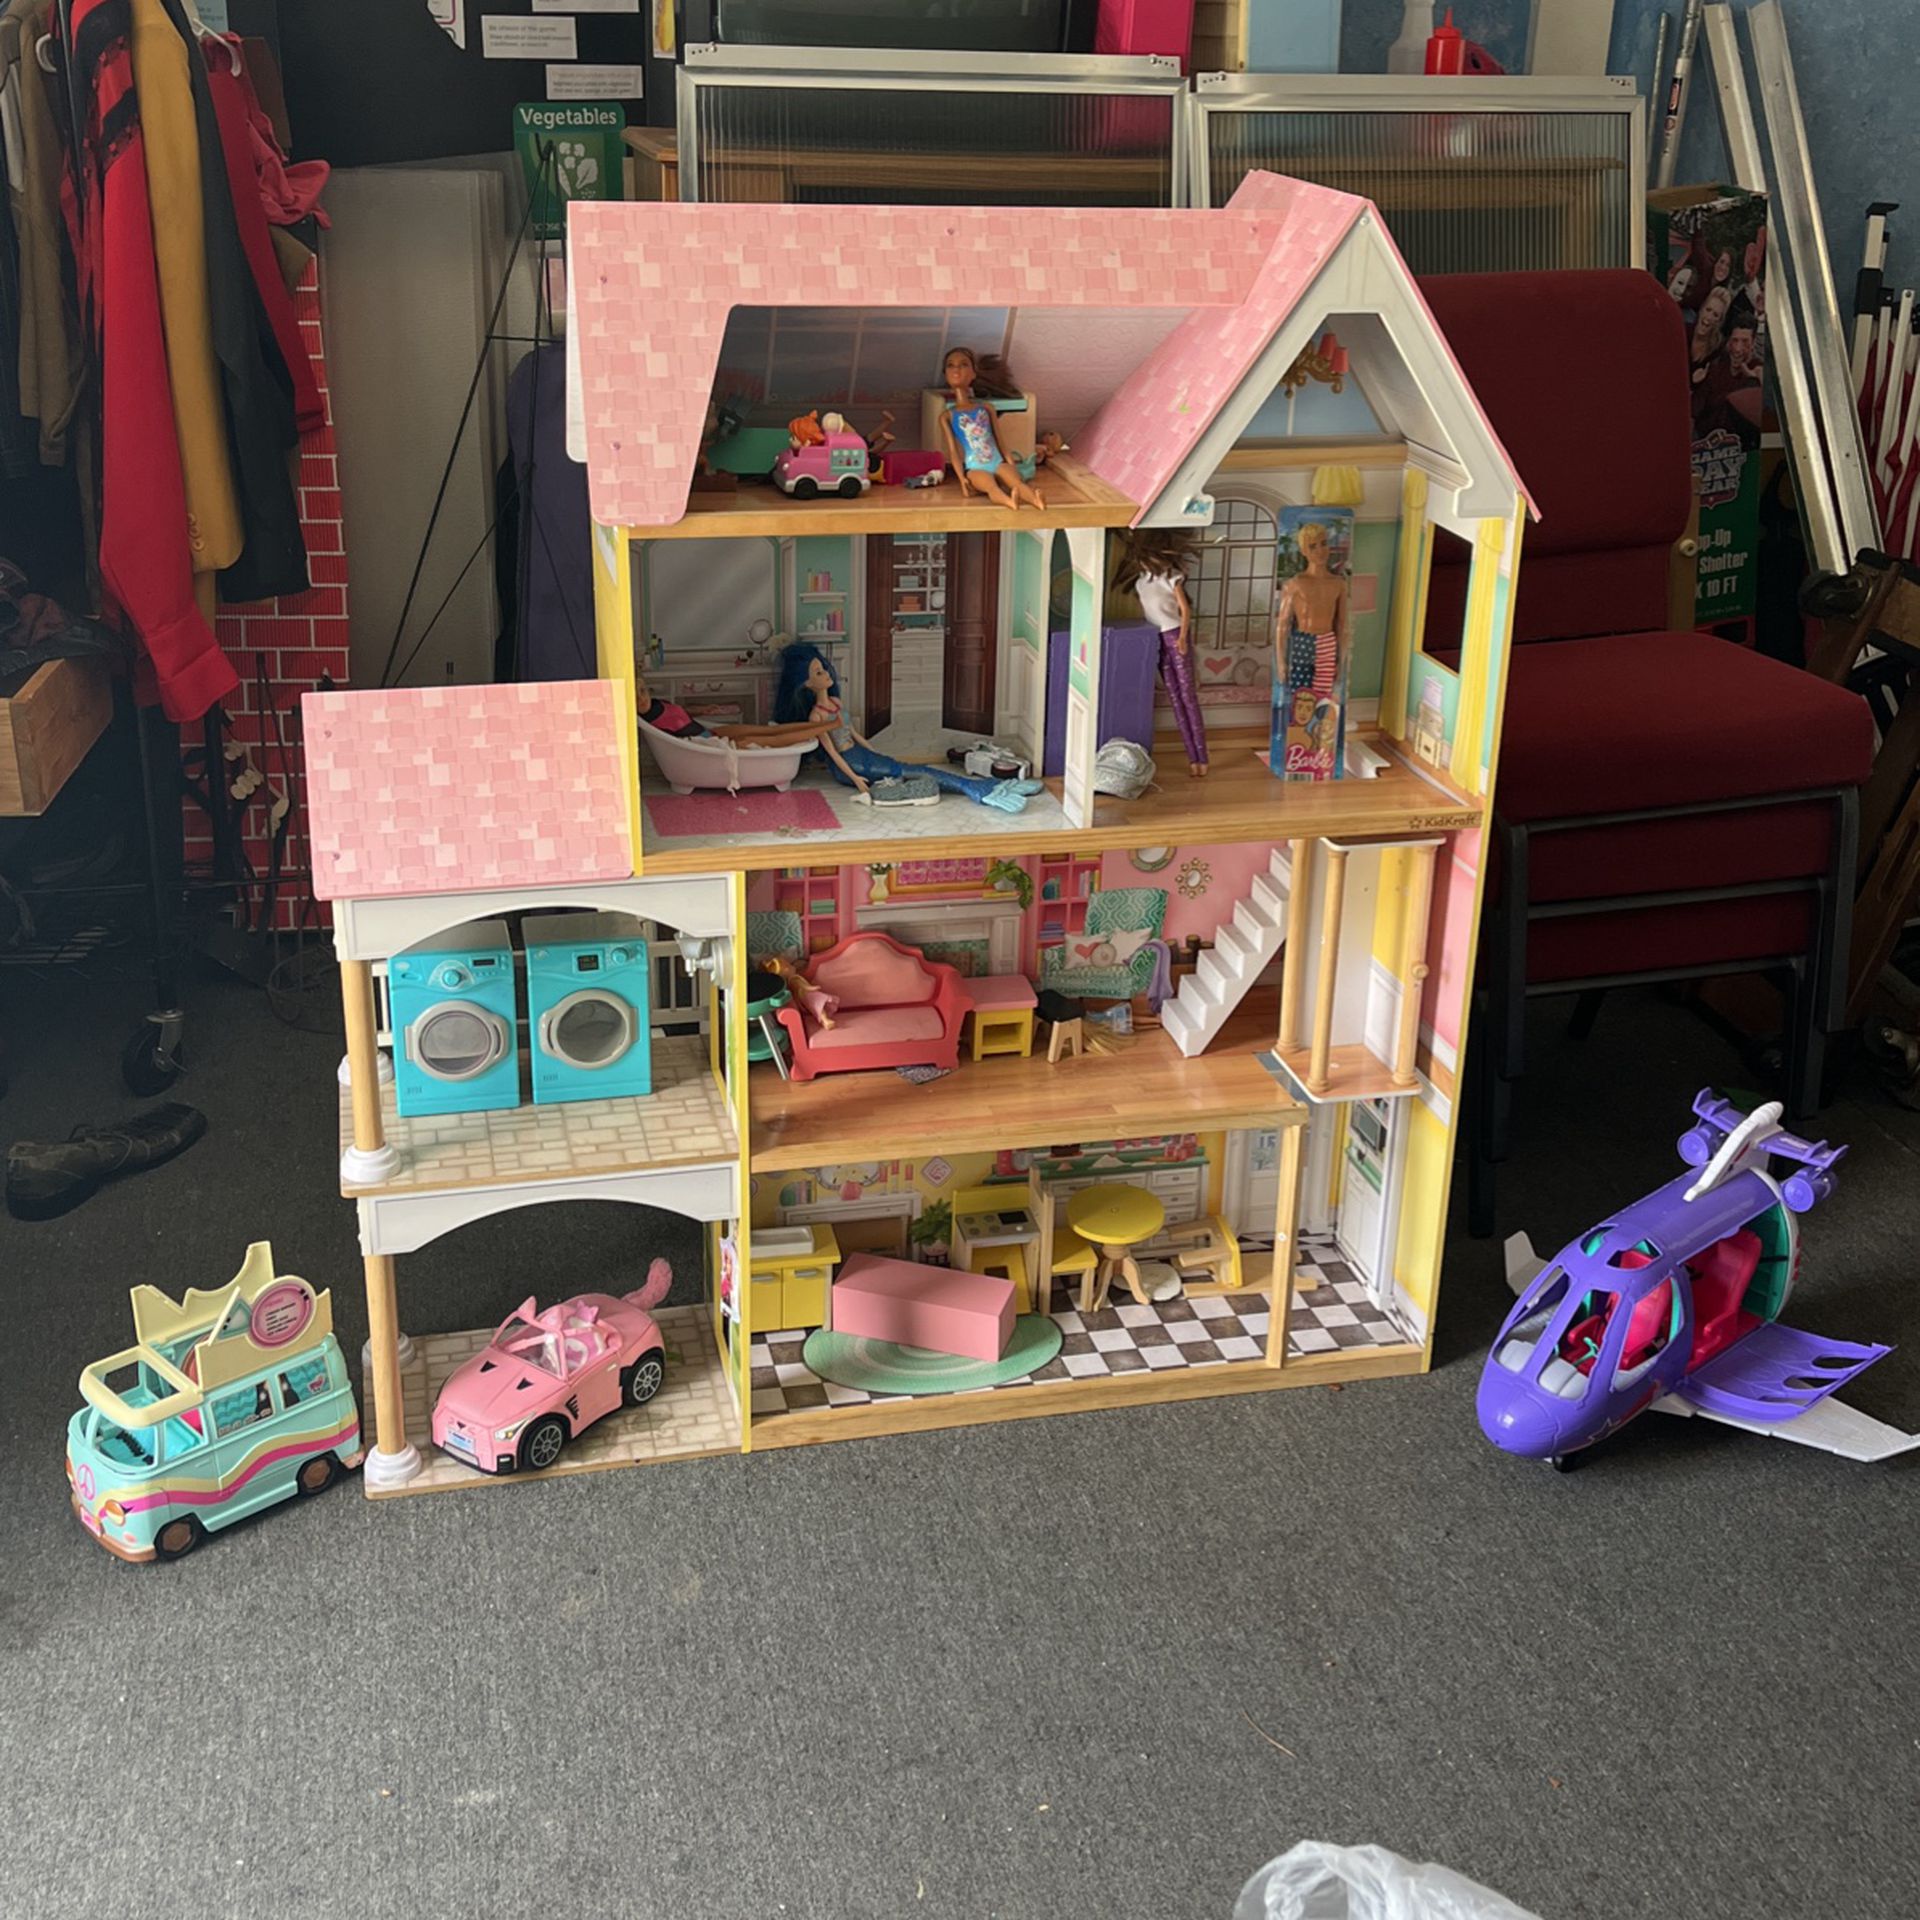 4 Foot Tall By 4 Foot Wide Barbie Dollhouse With All Amenities